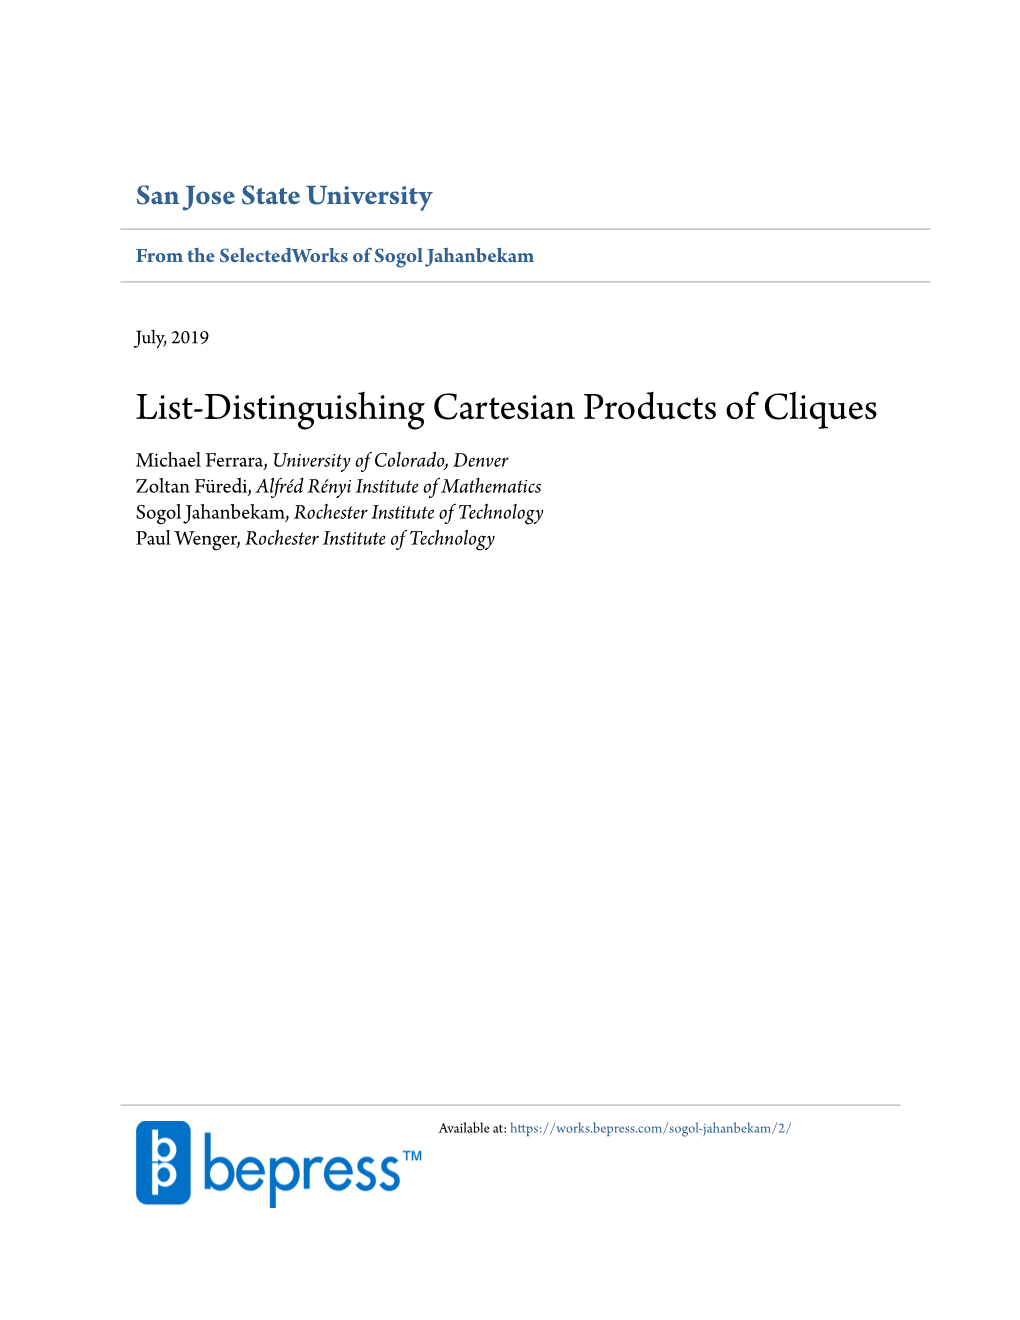 List-Distinguishing Cartesian Products of Cliques